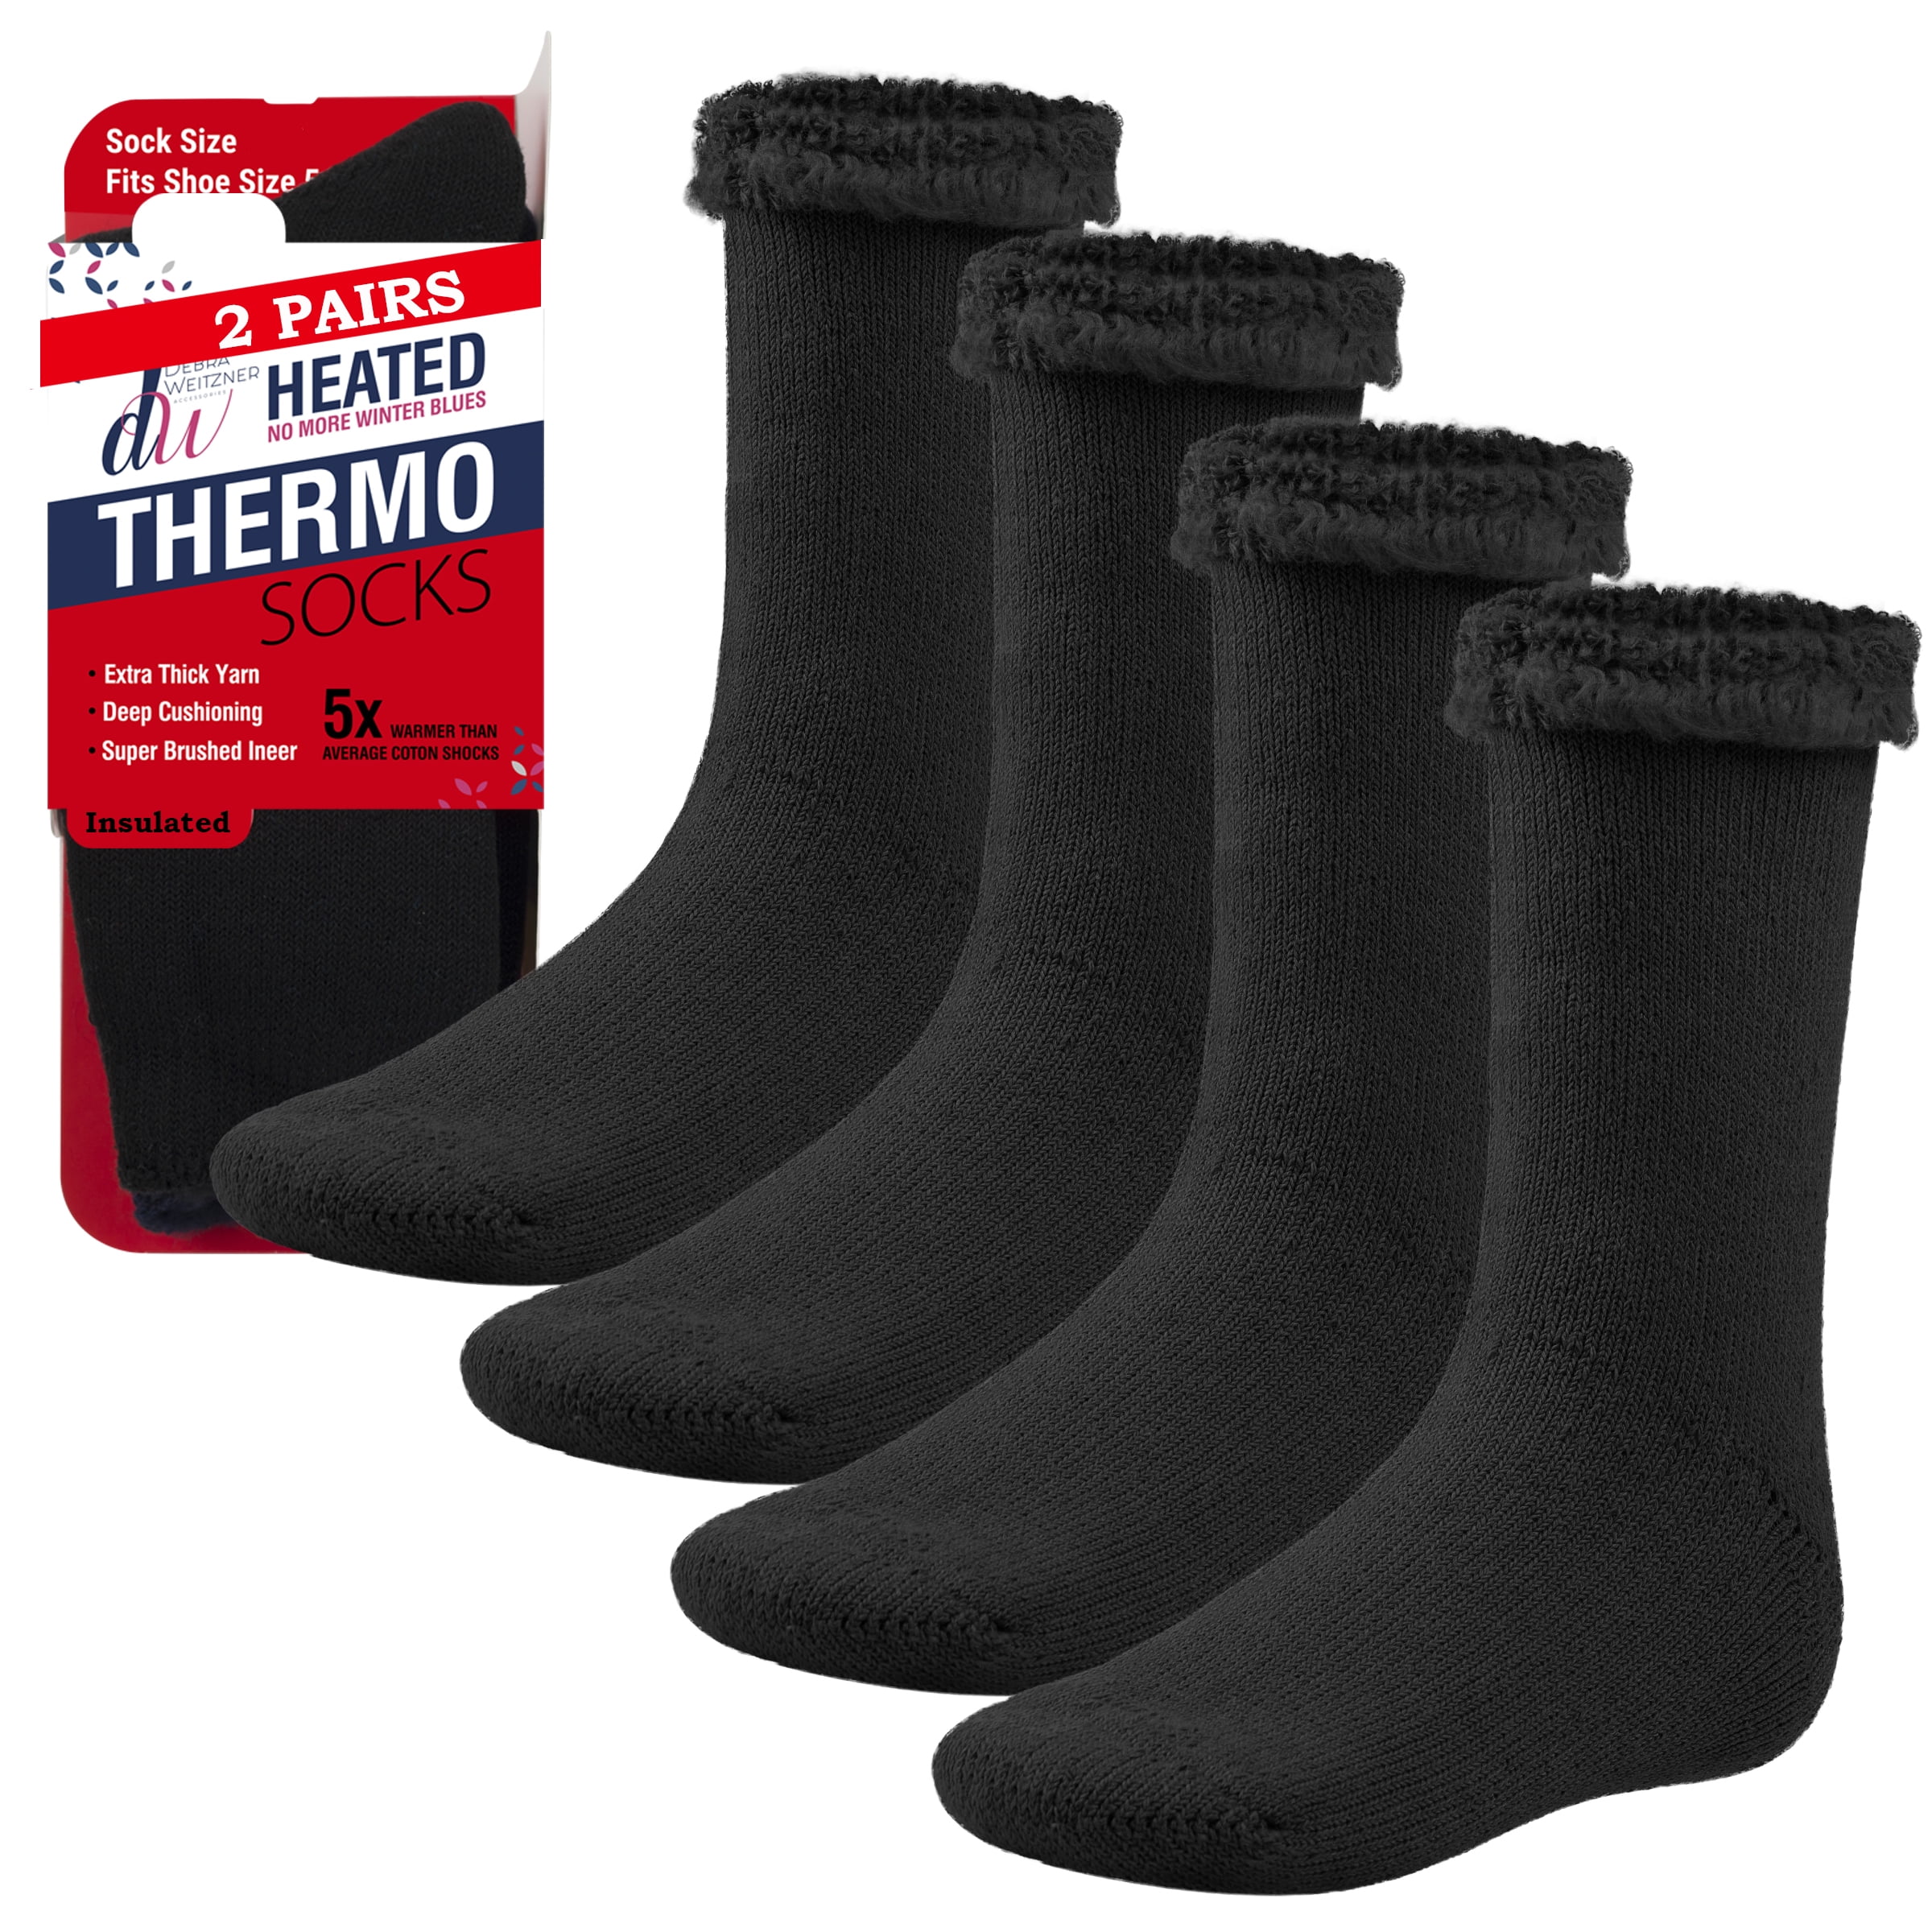 Warm Thermal Socks for Men and Women Extreme Cold Weather Winter